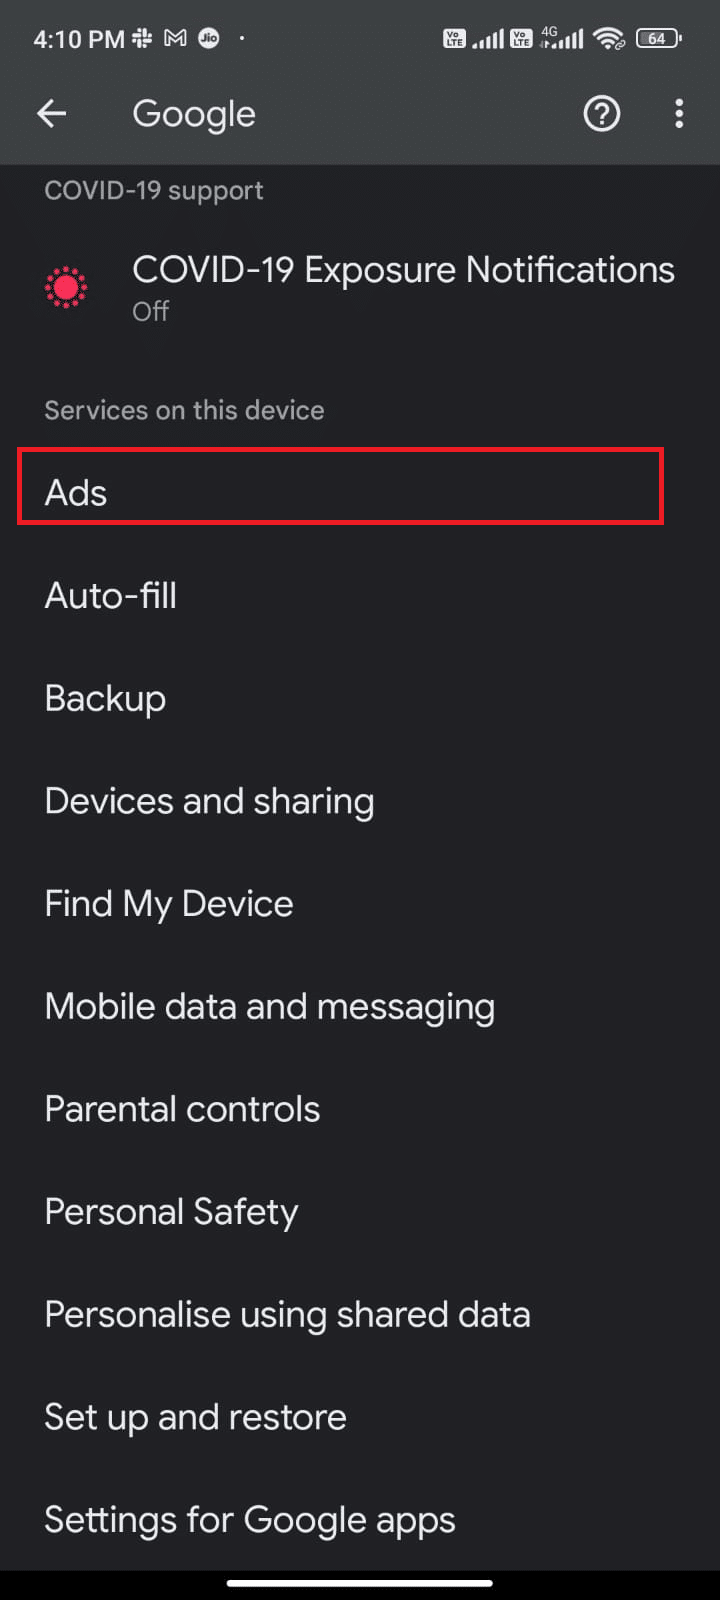 Tap the Ads option under Services on this device. How to Tell If Your Phone is Tapped